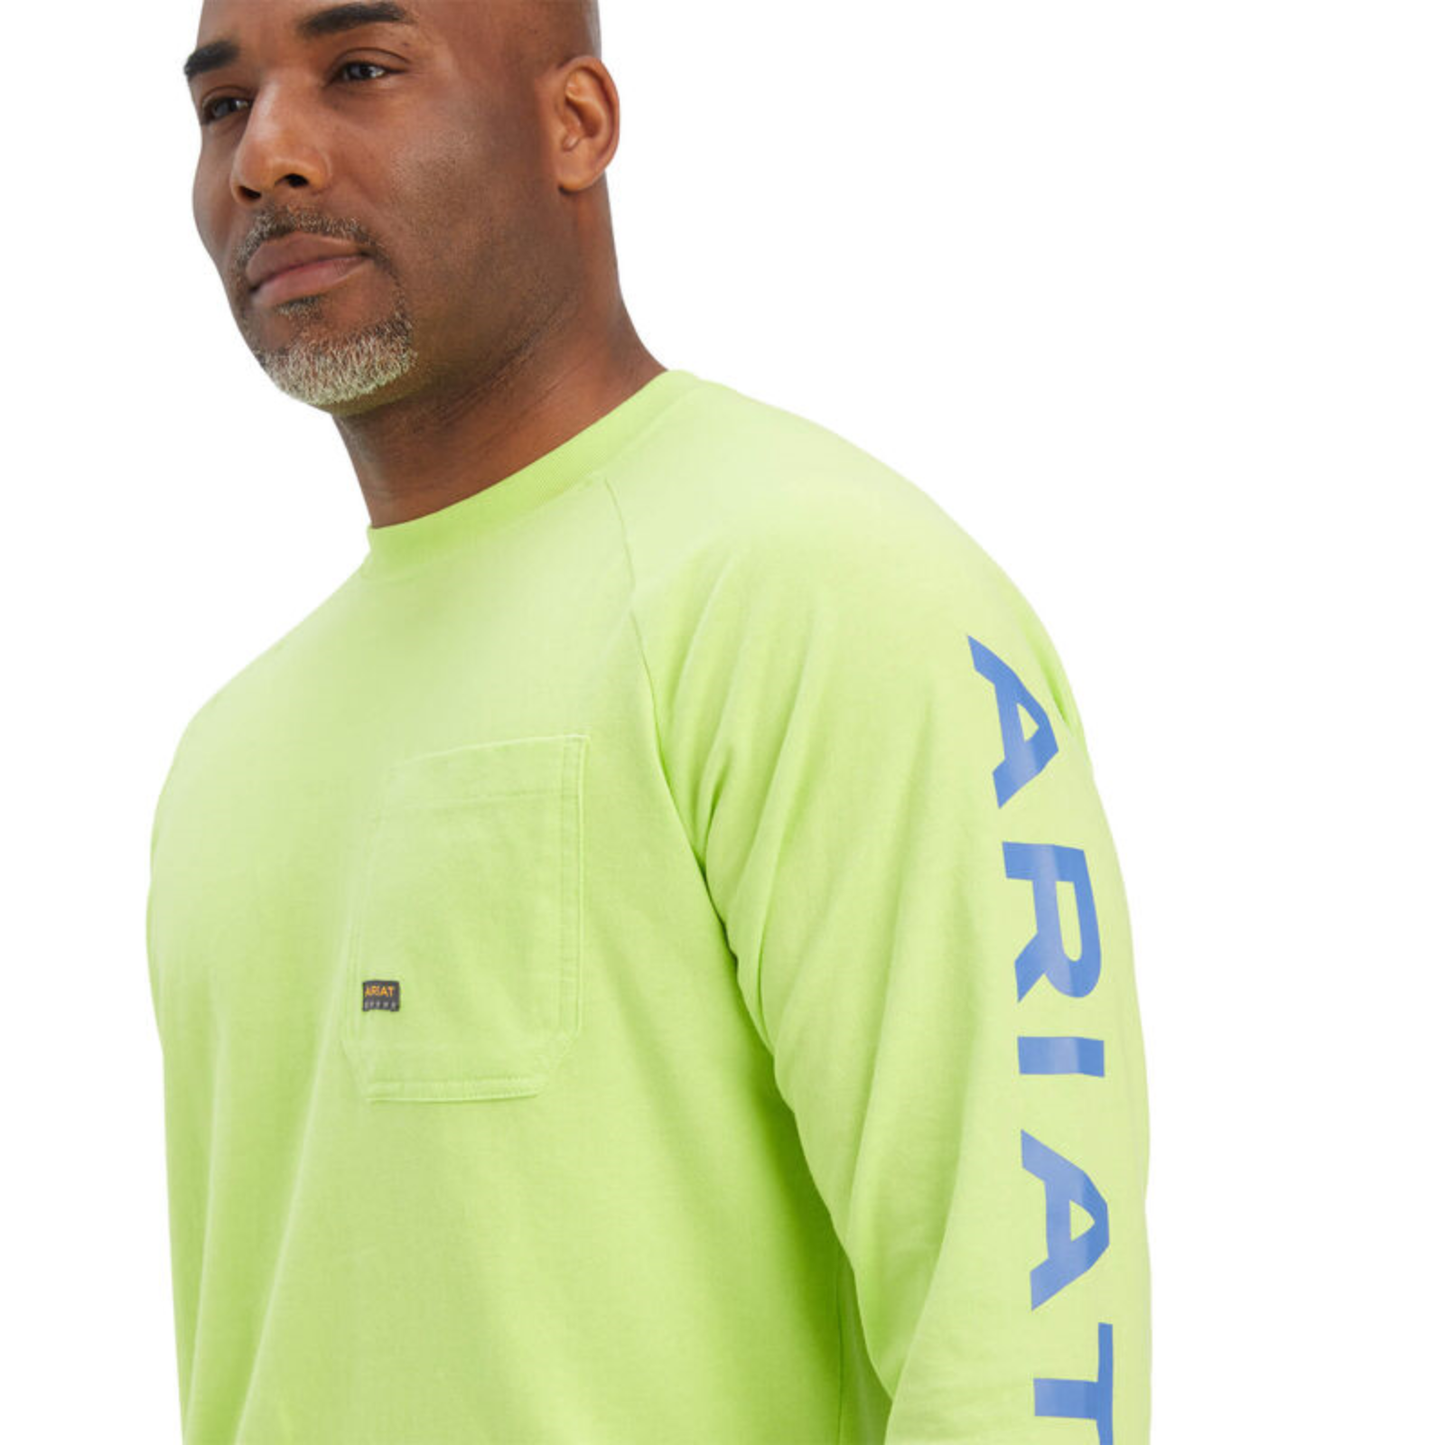 Ariat® Men's Rebar Cotton Strong Graphic Lime Green and Blue T-Shirt 10041625